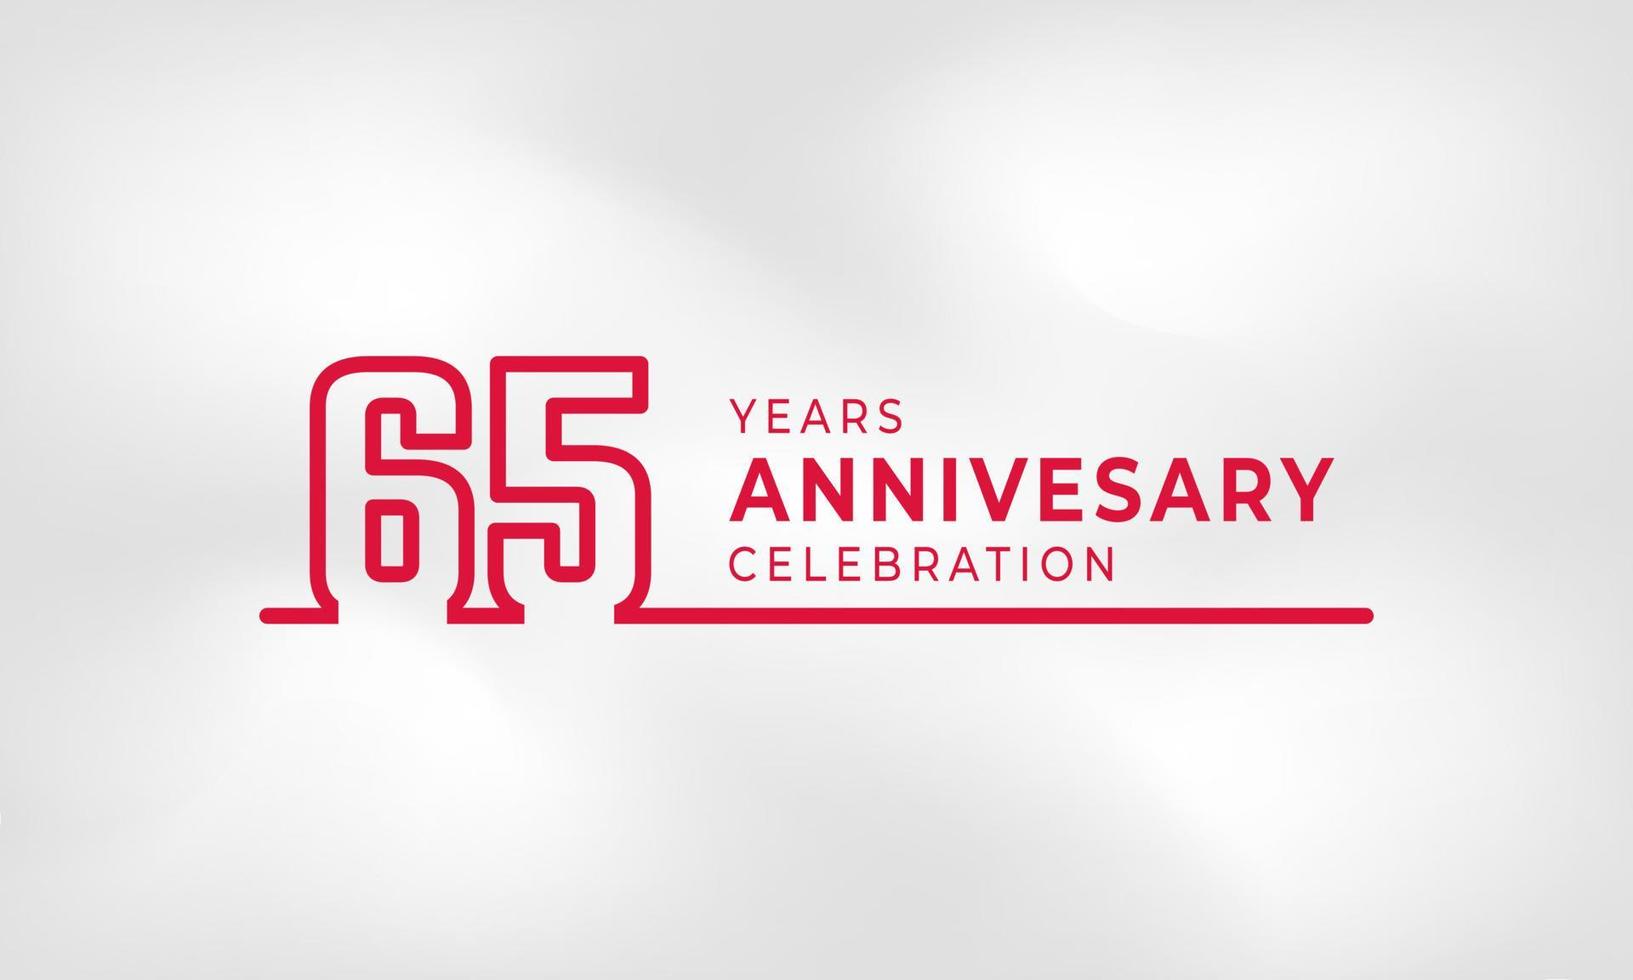 65 Year Anniversary Celebration Linked Logotype Outline Number Red Color for Celebration Event, Wedding, Greeting card, and Invitation Isolated on White Texture Background vector